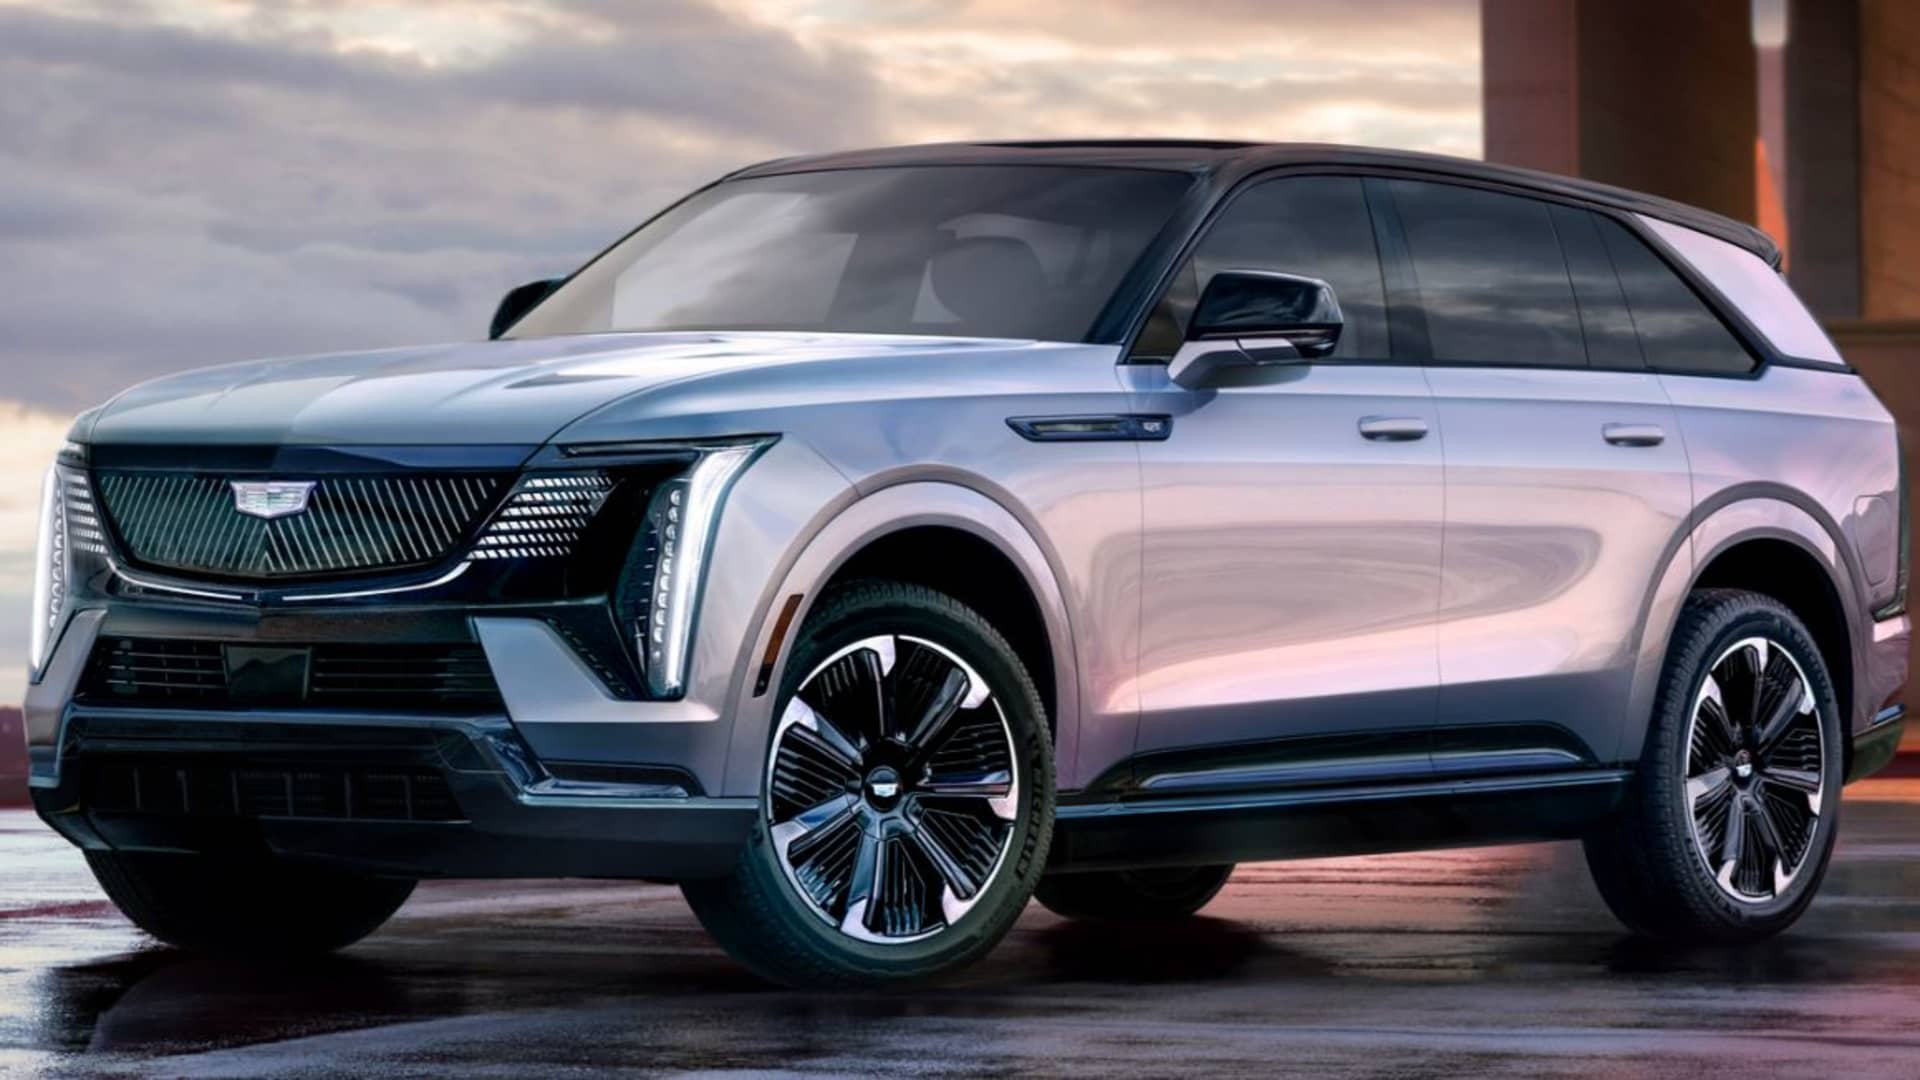 GM electric Cadillac Escalade IQ revealed, starting at $130,000